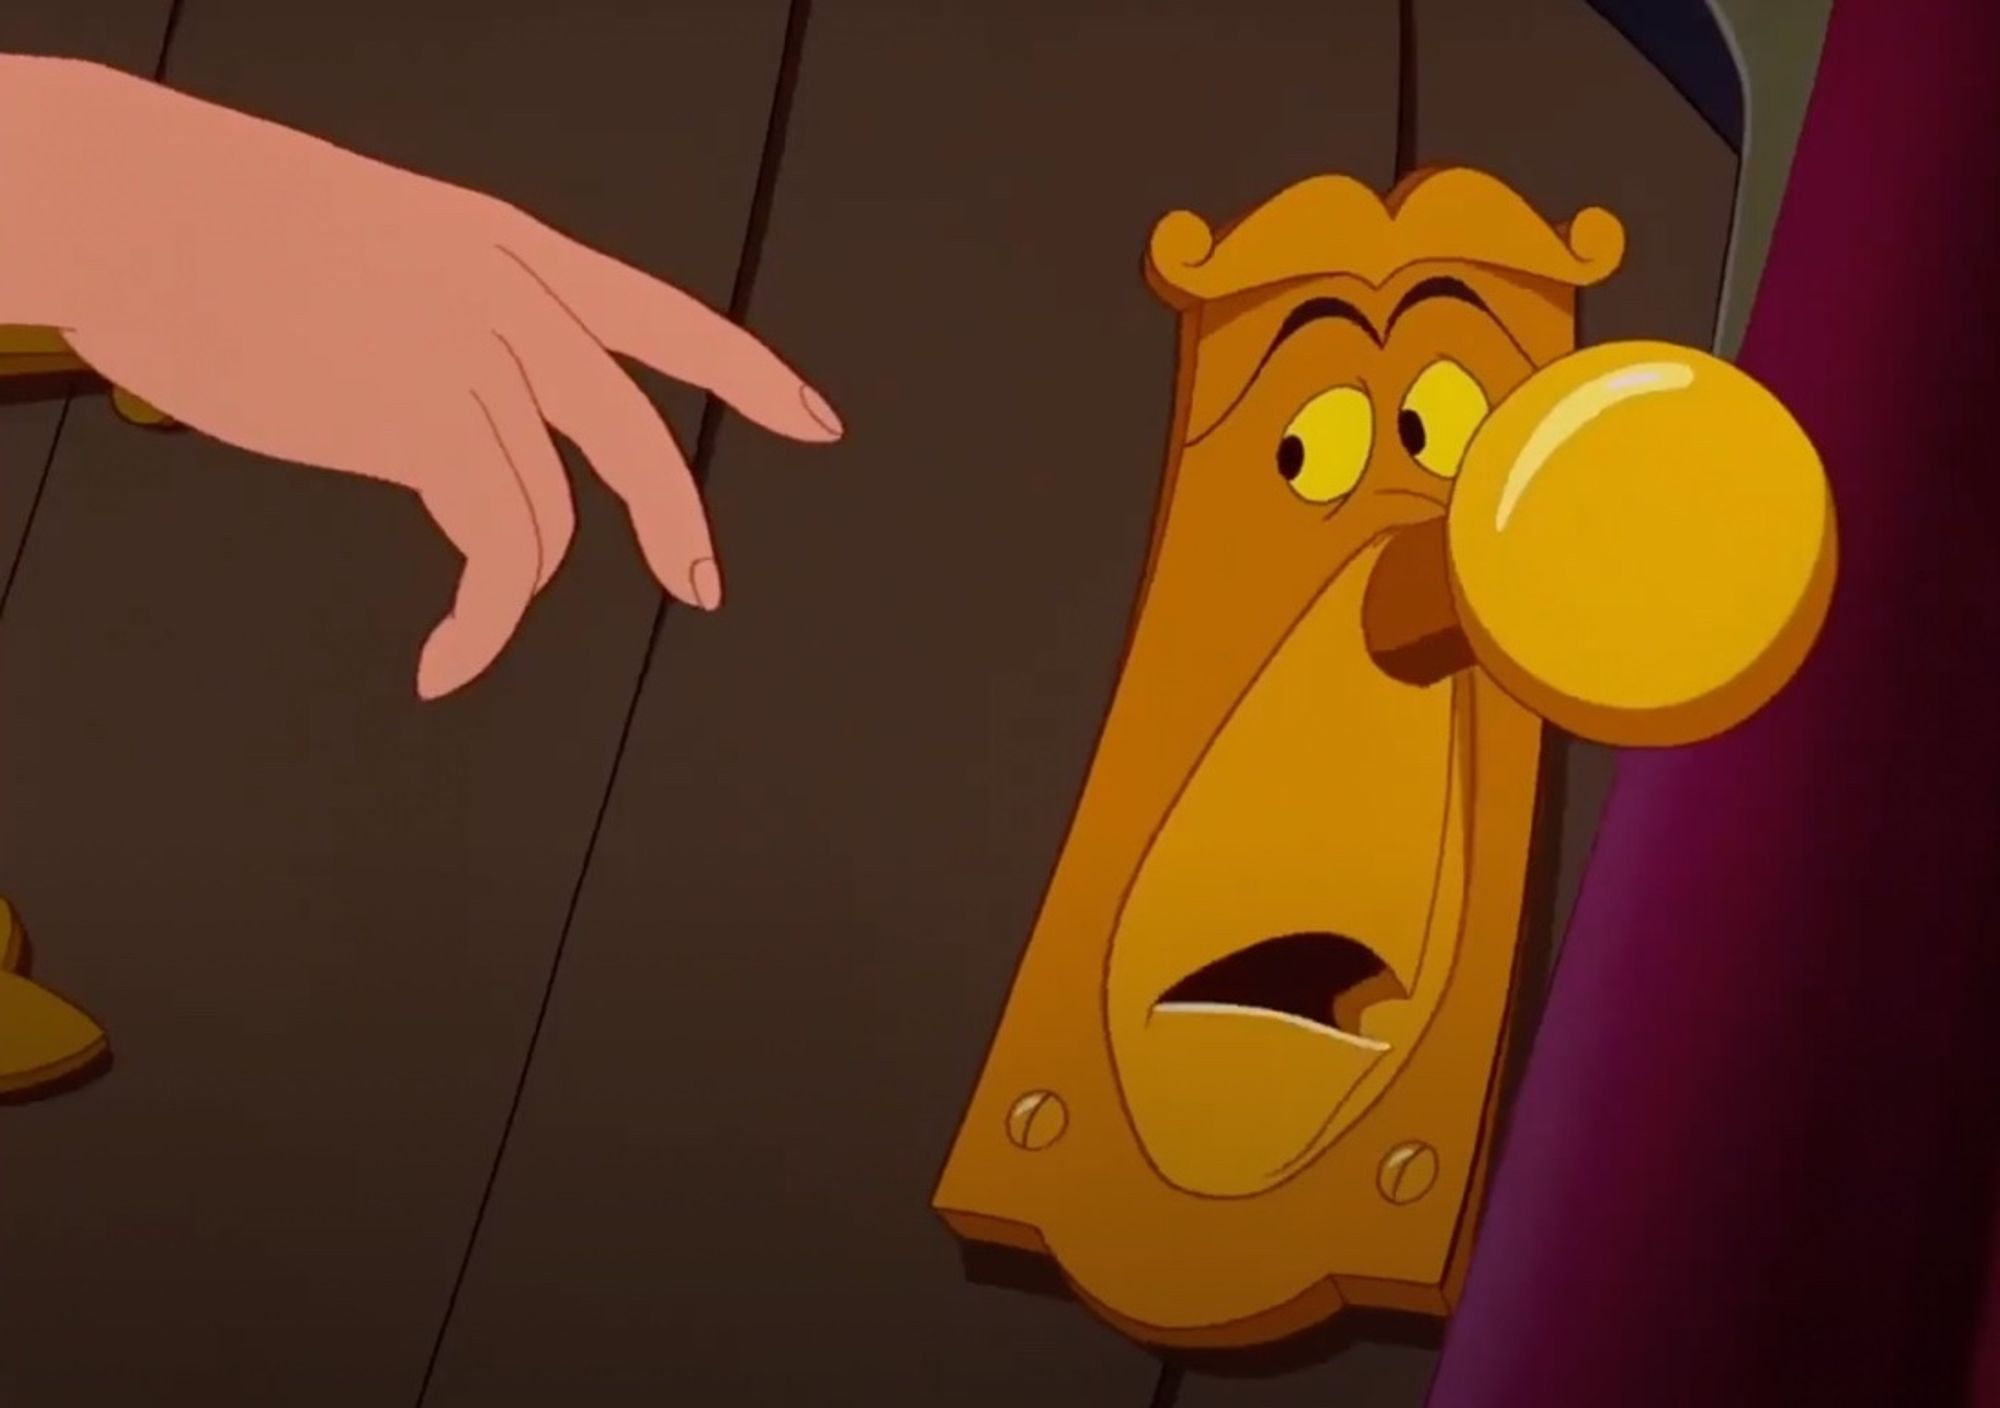 A hand reaching for an anthropomorphized door knob